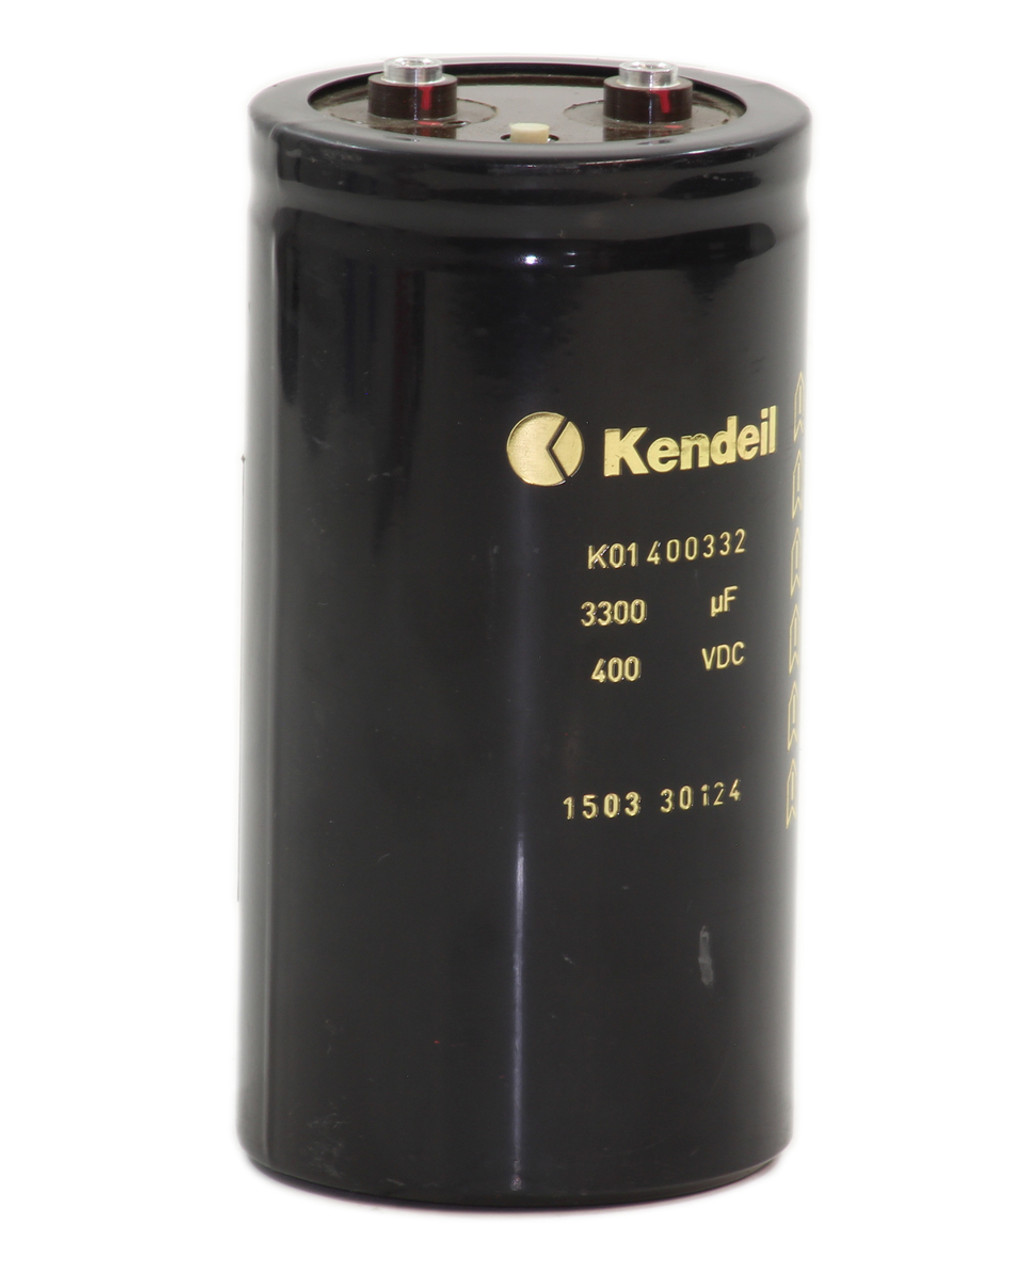 Kendeil K01400332 Surge-Proof Capacitor 400V 3300 ?F 3300 ?F; Aluminium Can with Insulation Sleeve